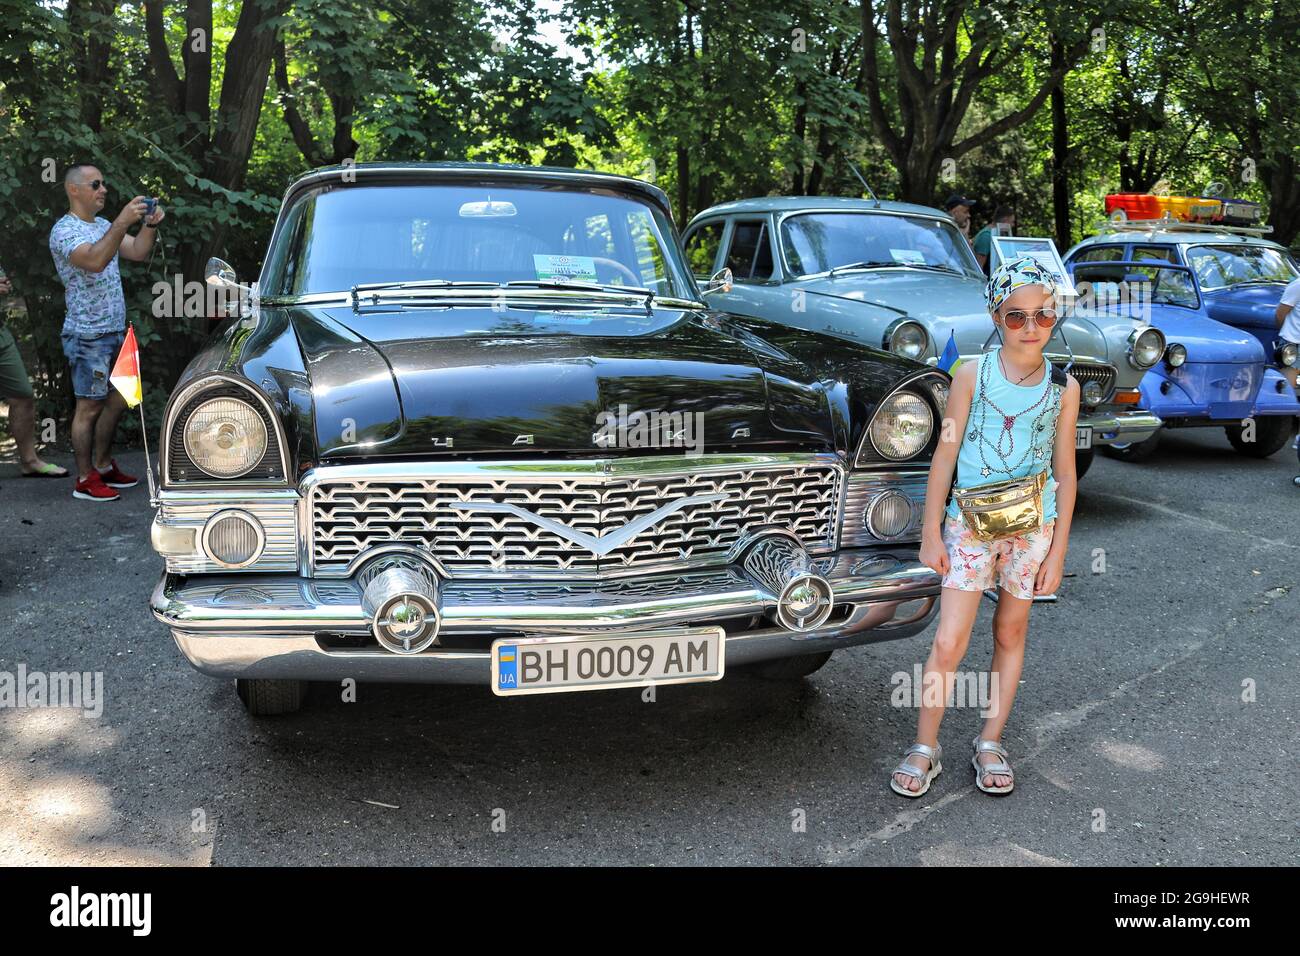 Non Exclusive: ODESA, UKRAINE - JULY 24, 2021 - A girl poses for a photo next to a black GAZ Chaika during the Old School Weekend 2021 car show in Ode Stock Photo